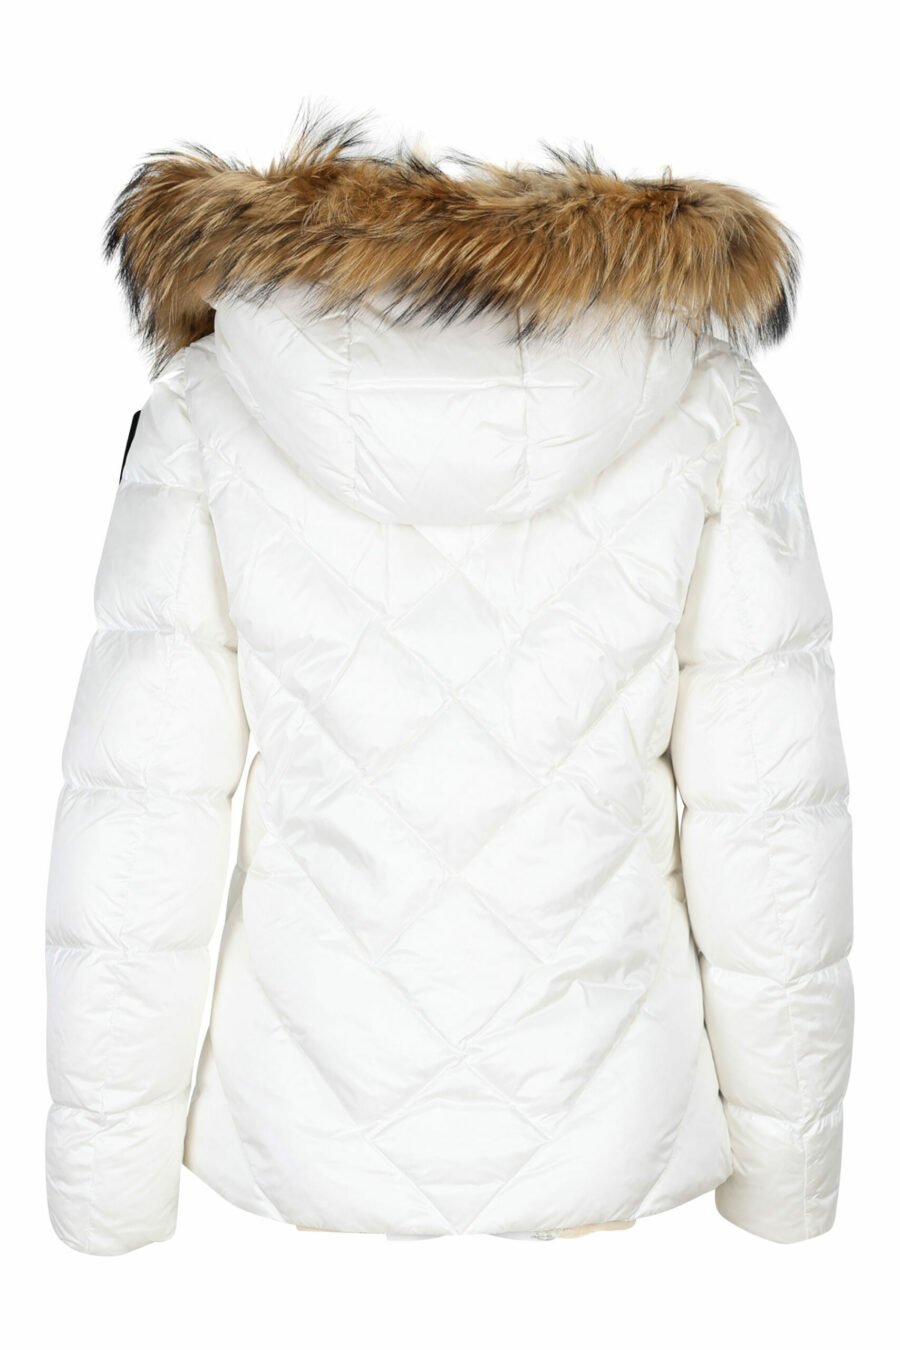 White hooded jacket with fur hood and diagonal lines and beige lining - 8058610678791 3 scaled